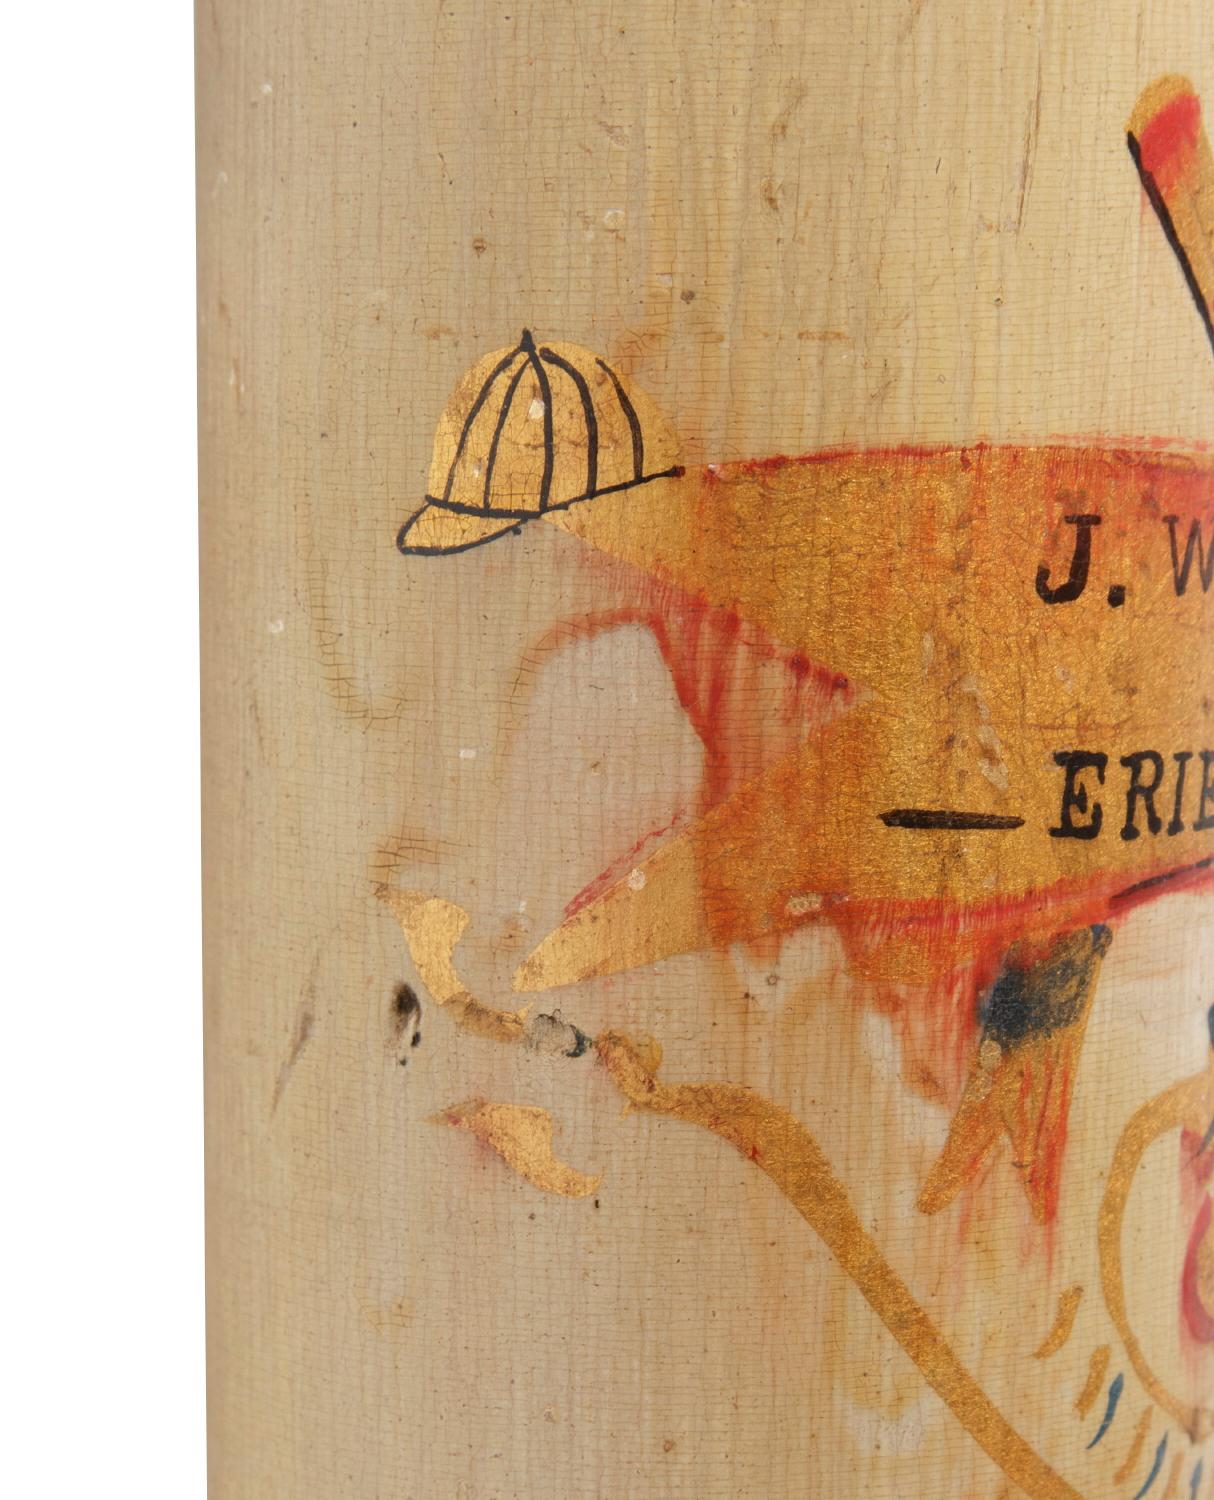 Oversized, Paint-Decorated Baseball Bat Presented to J. Whipple In Good Condition In York County, PA